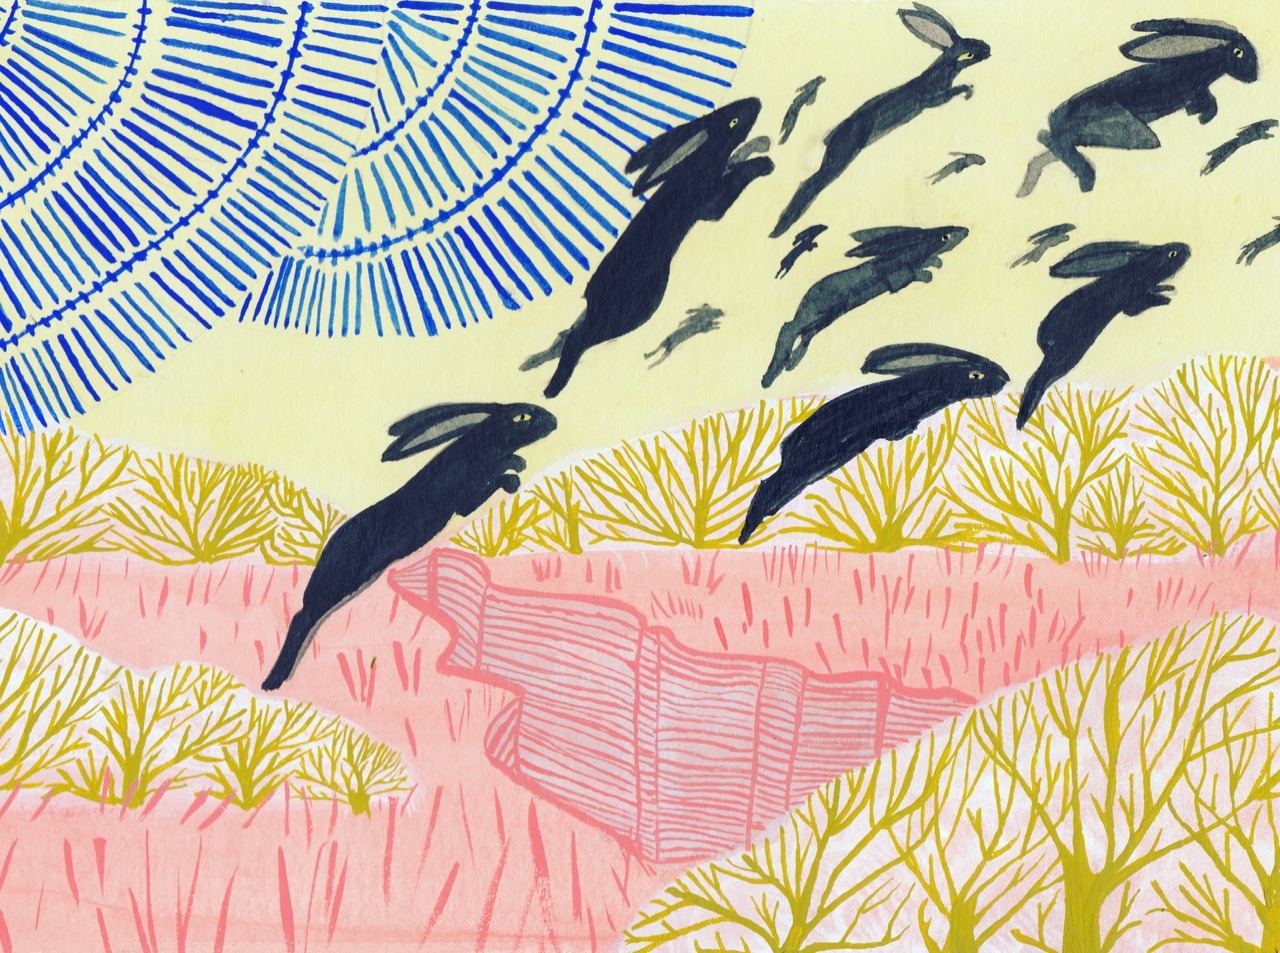 The black Hares in flight. Original Illustration by Clay horses design.